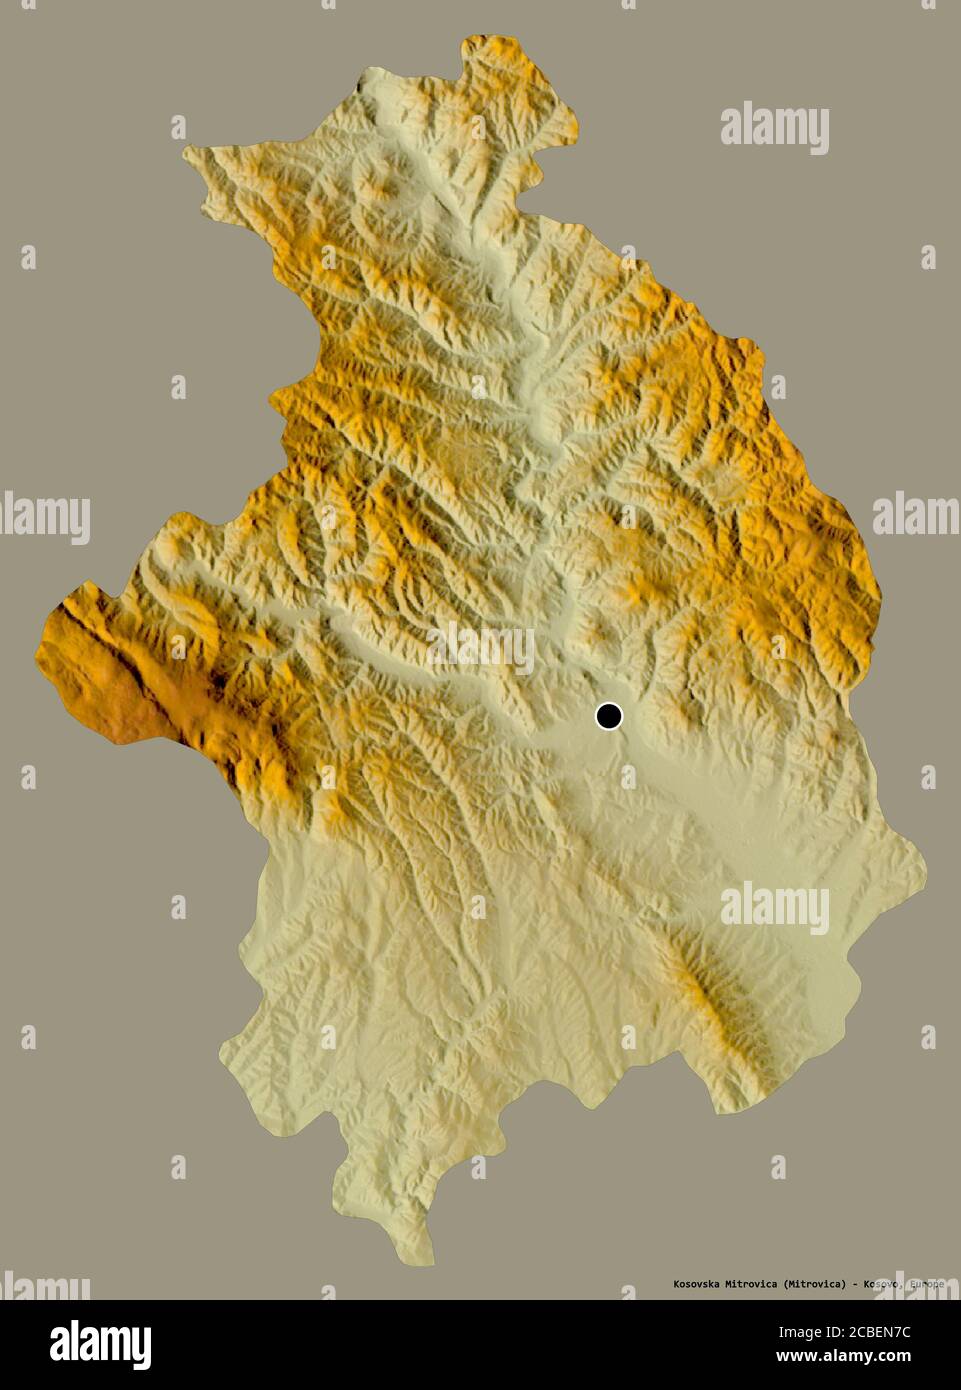 Shape of Kosovska Mitrovica, district of Kosovo, with its capital isolated on a solid color background. Topographic relief map. 3D rendering Stock Photo